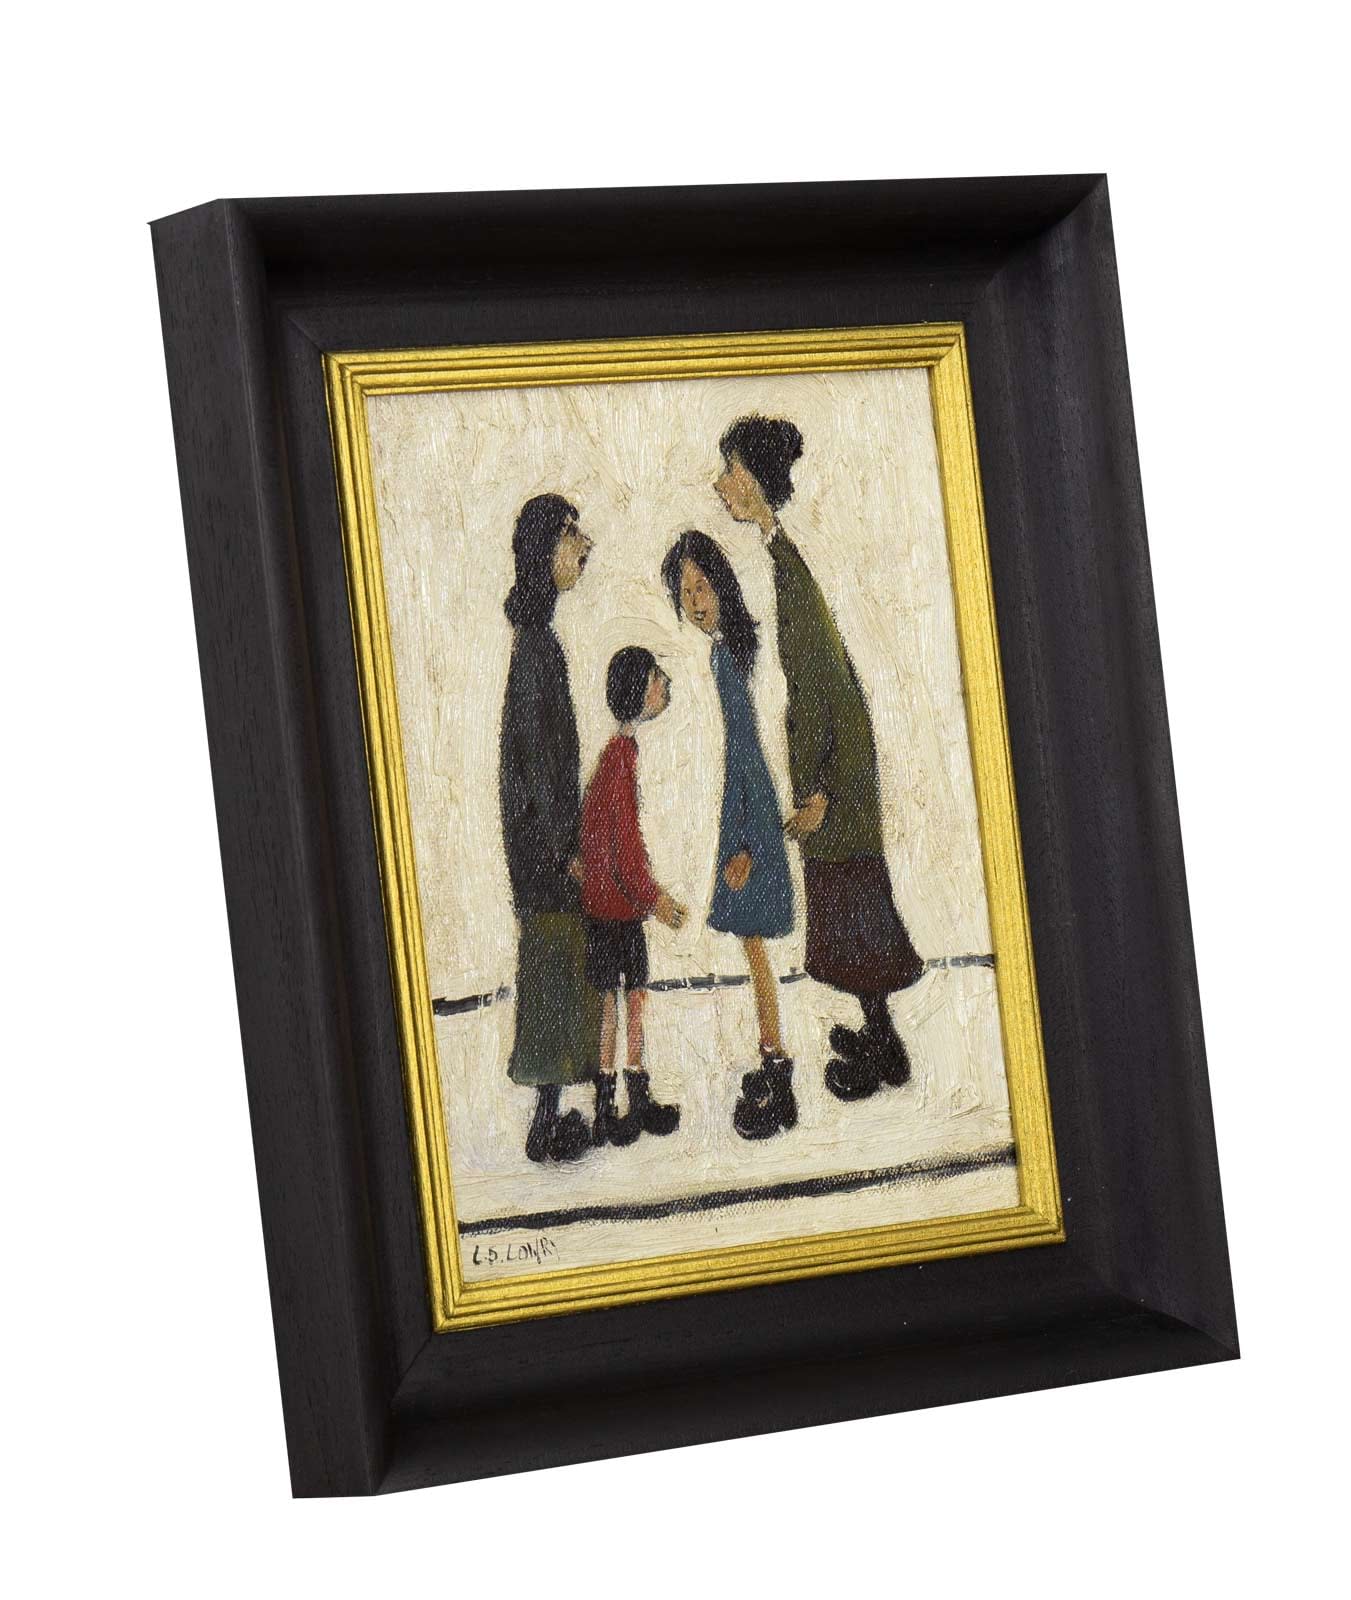 Family Group after L.S.Lowry